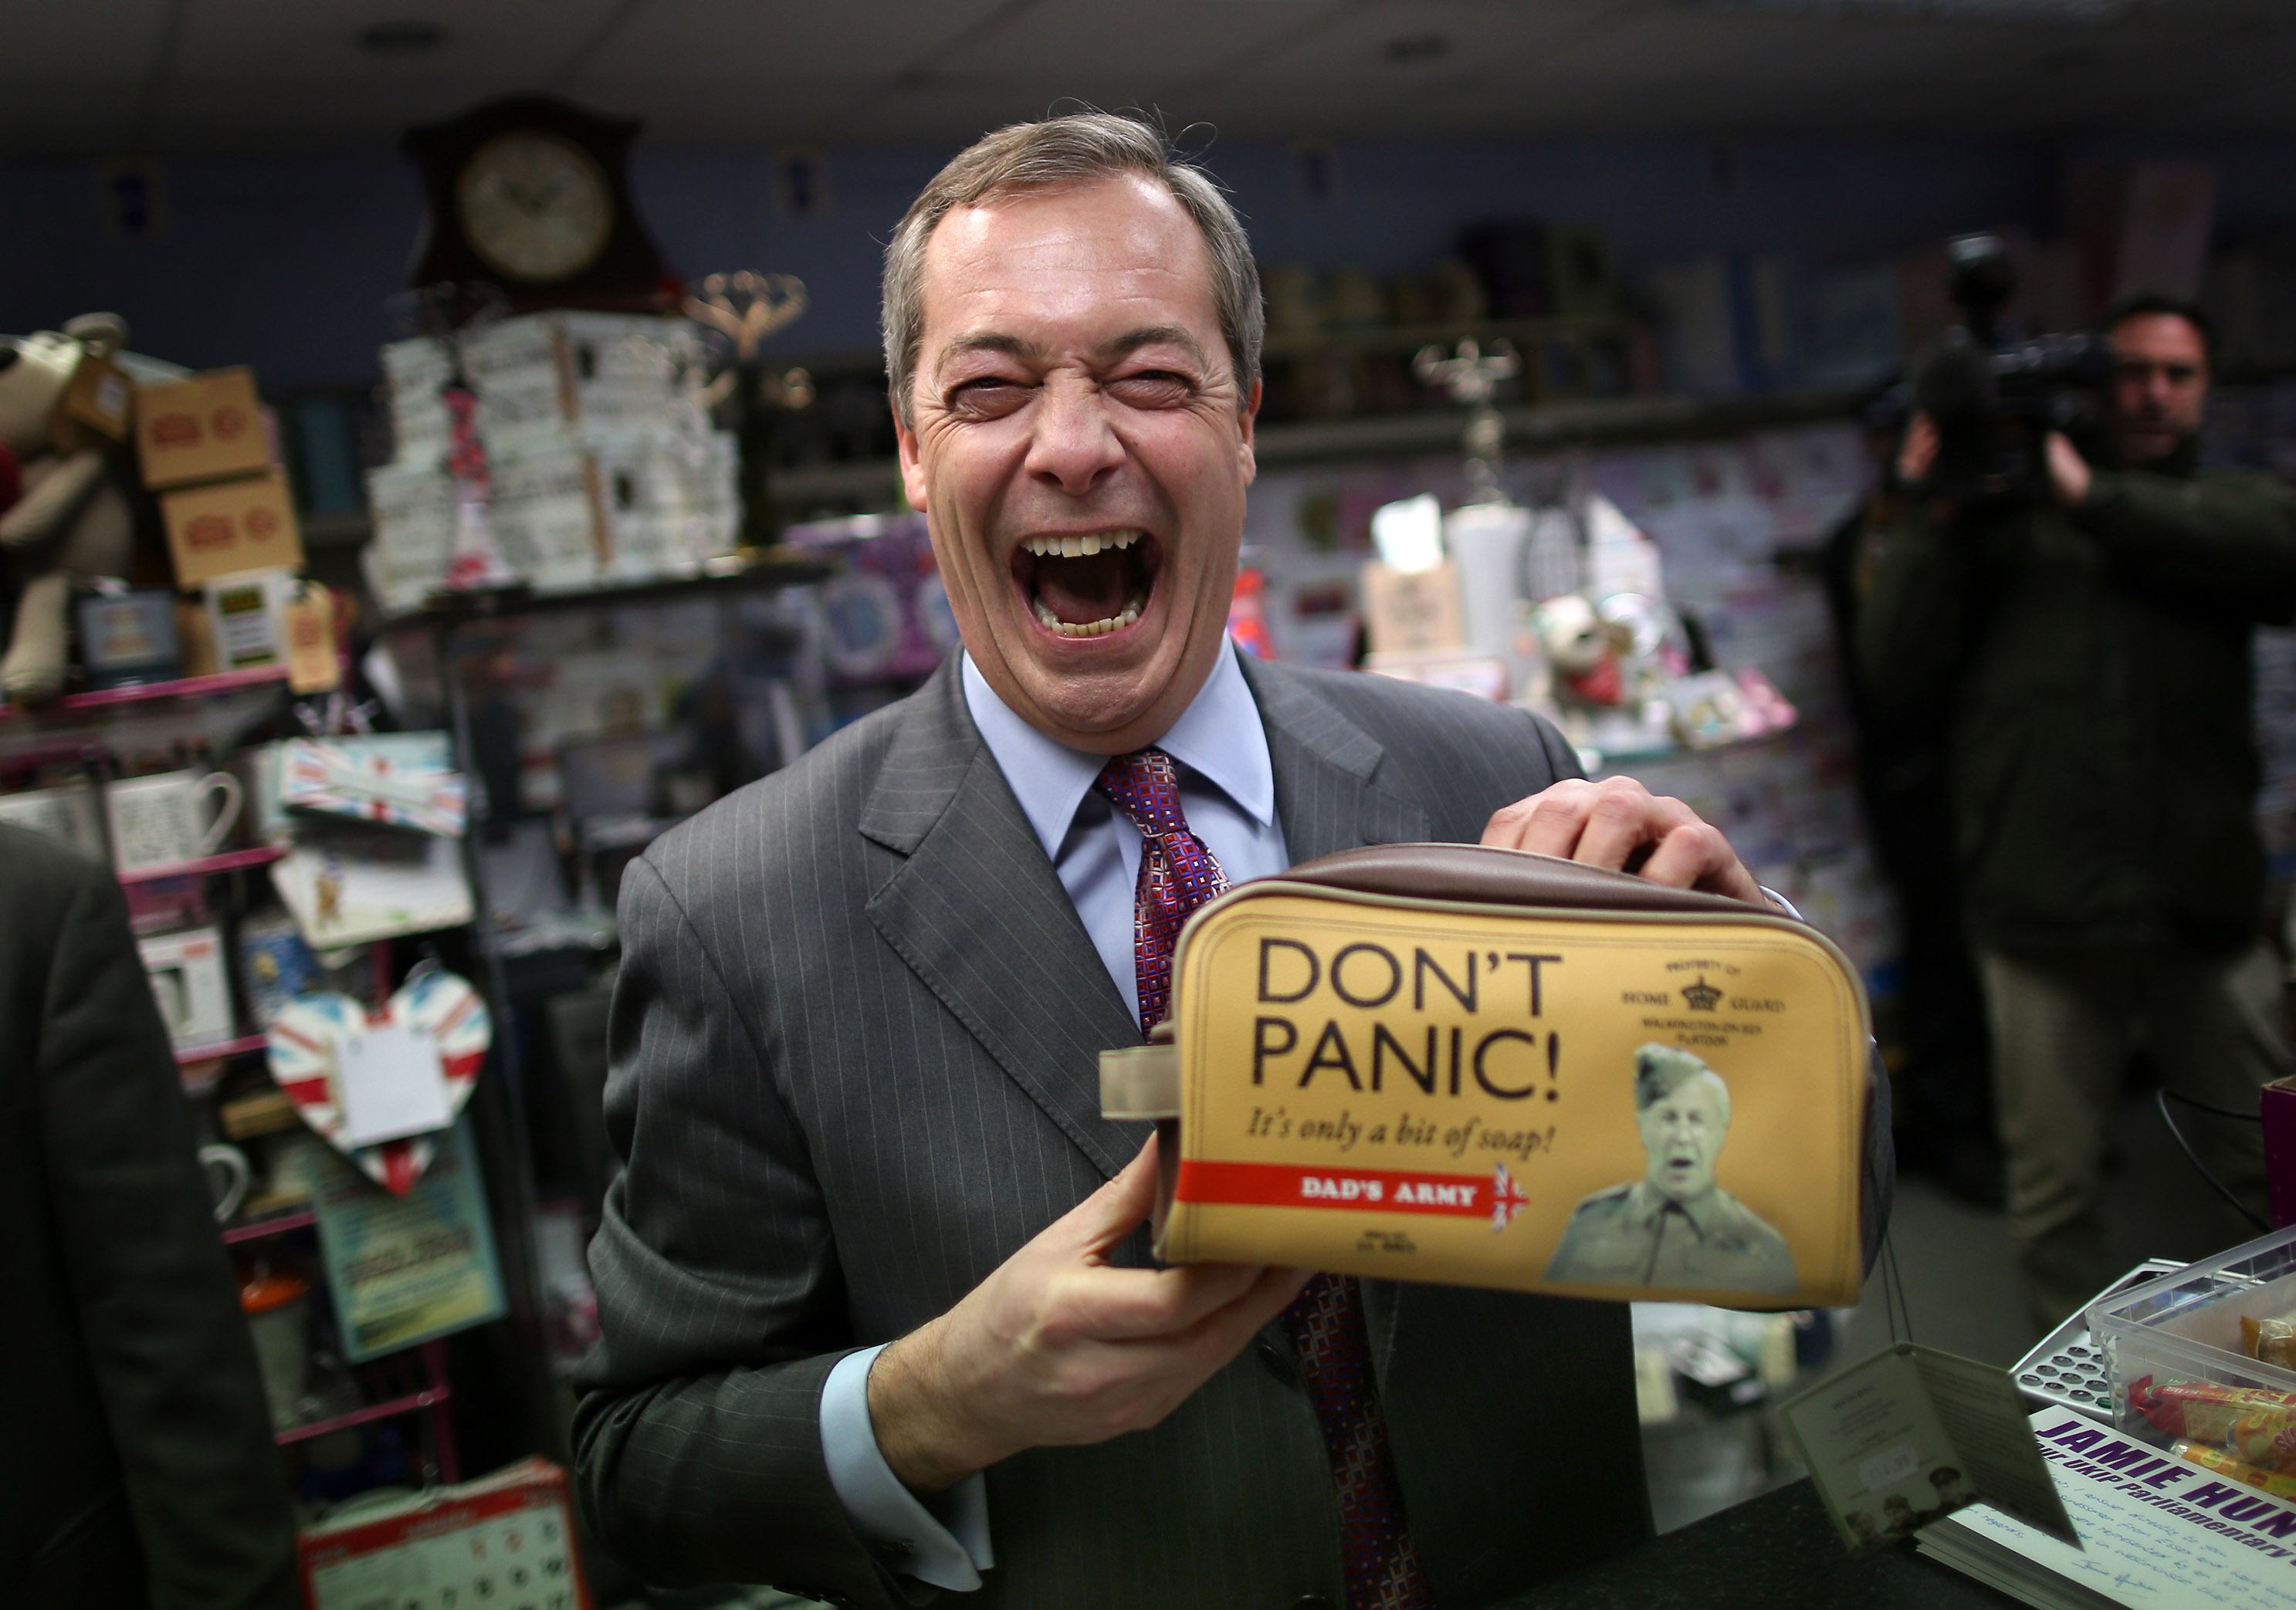 Nigel Farage did what Britons did best: resigned and got out of the way.